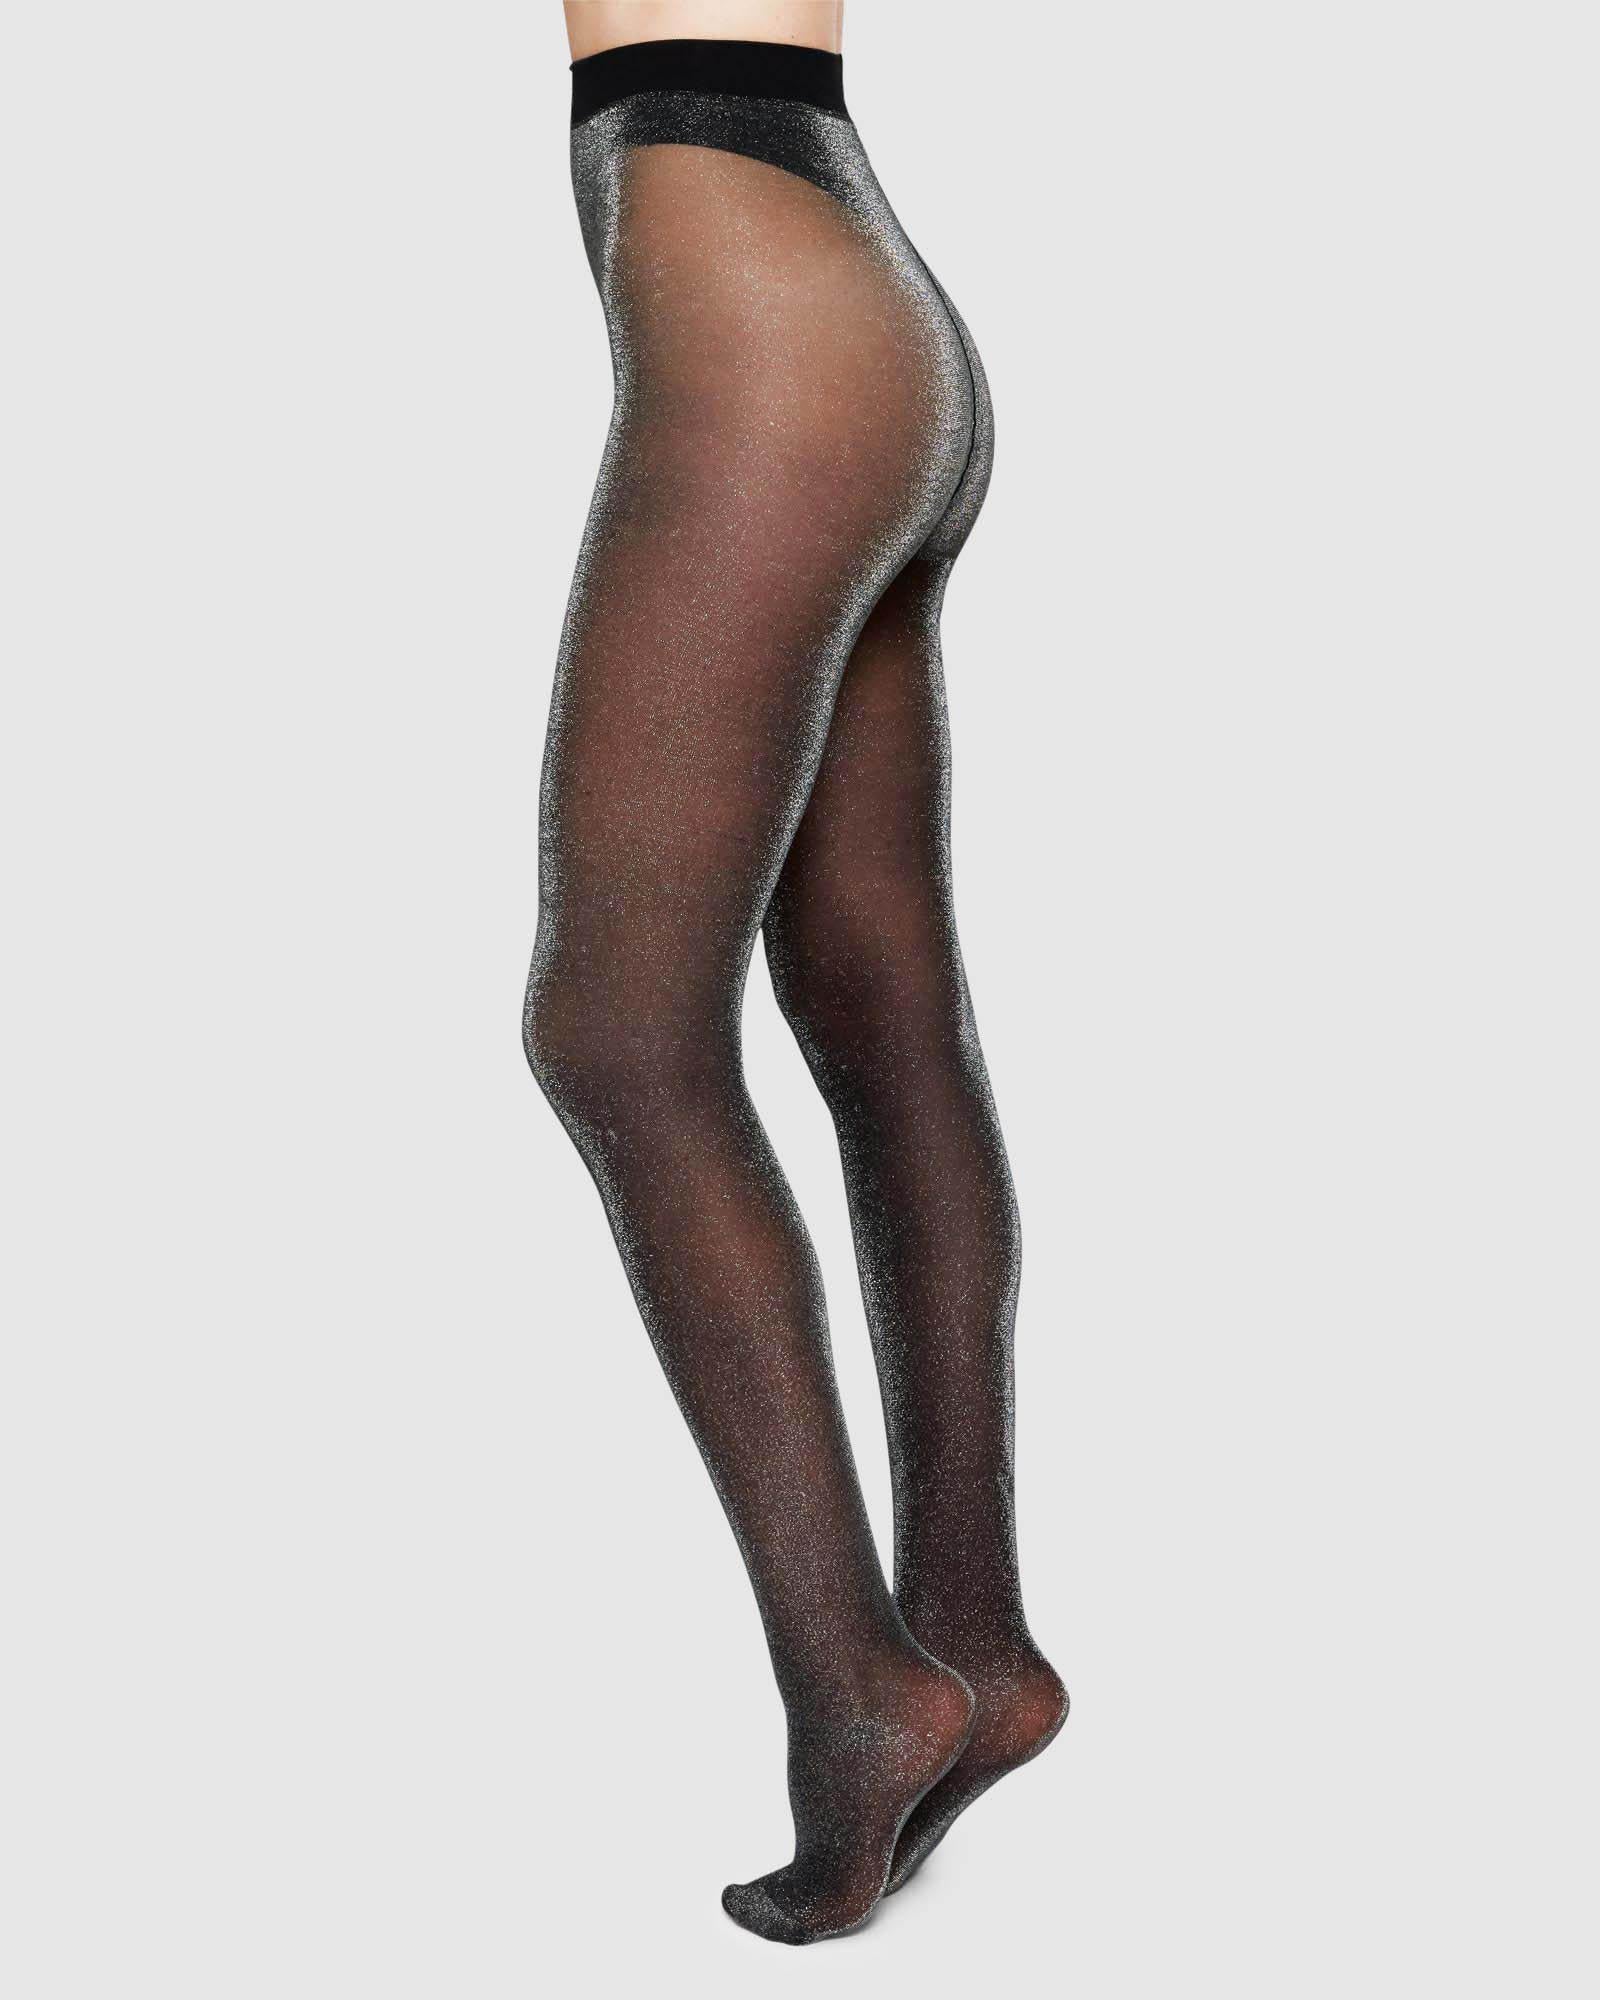 Red Lurex Shimmer Pantyhose Tights One Size 